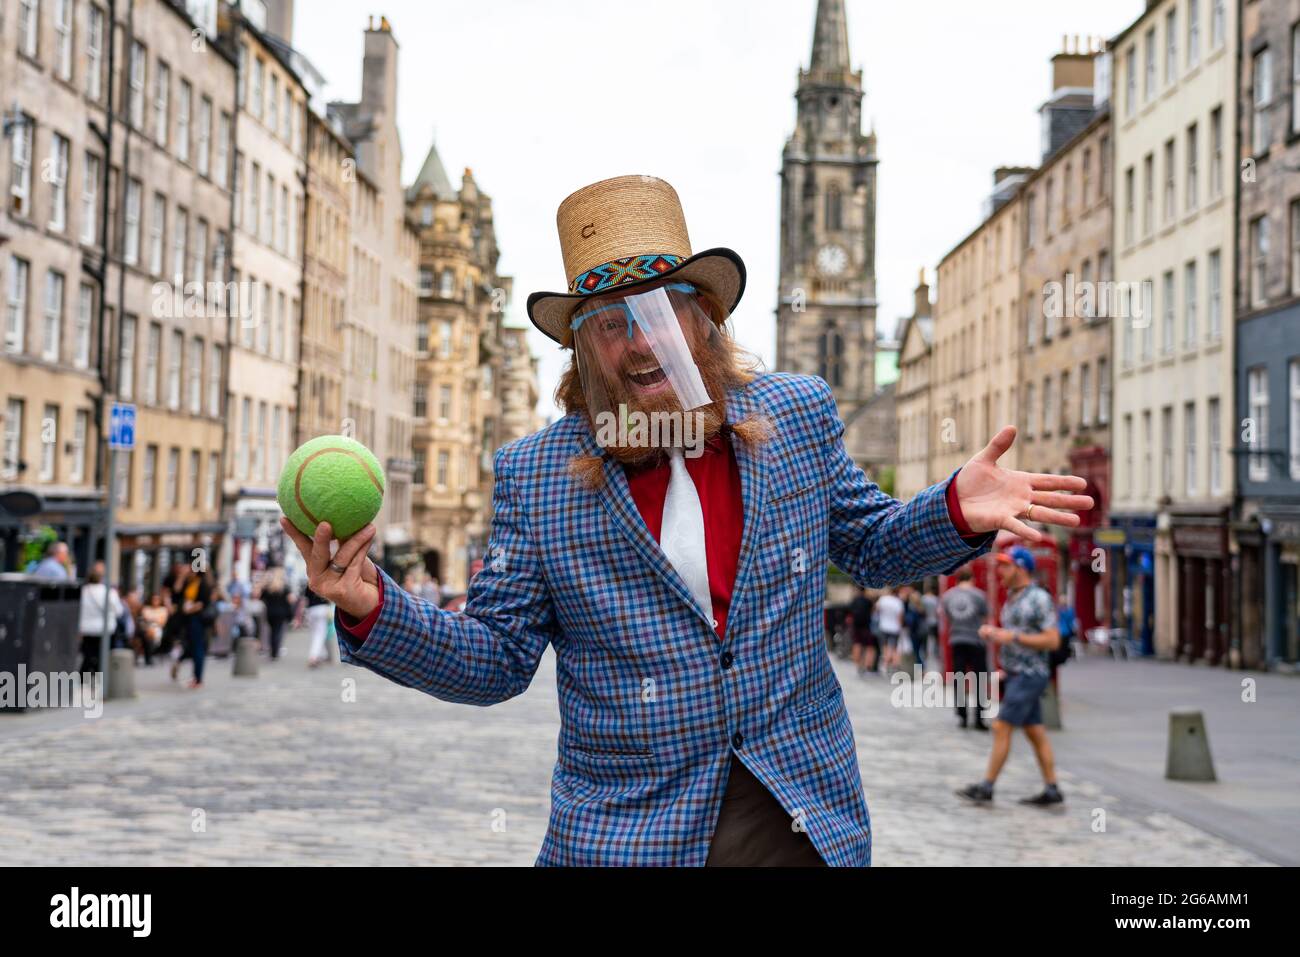 Edinburgh Fringe Festival street performer on Royal Mile on what would have been opening day during covid-19 lockdown, Scotland, Uk Stock Photo